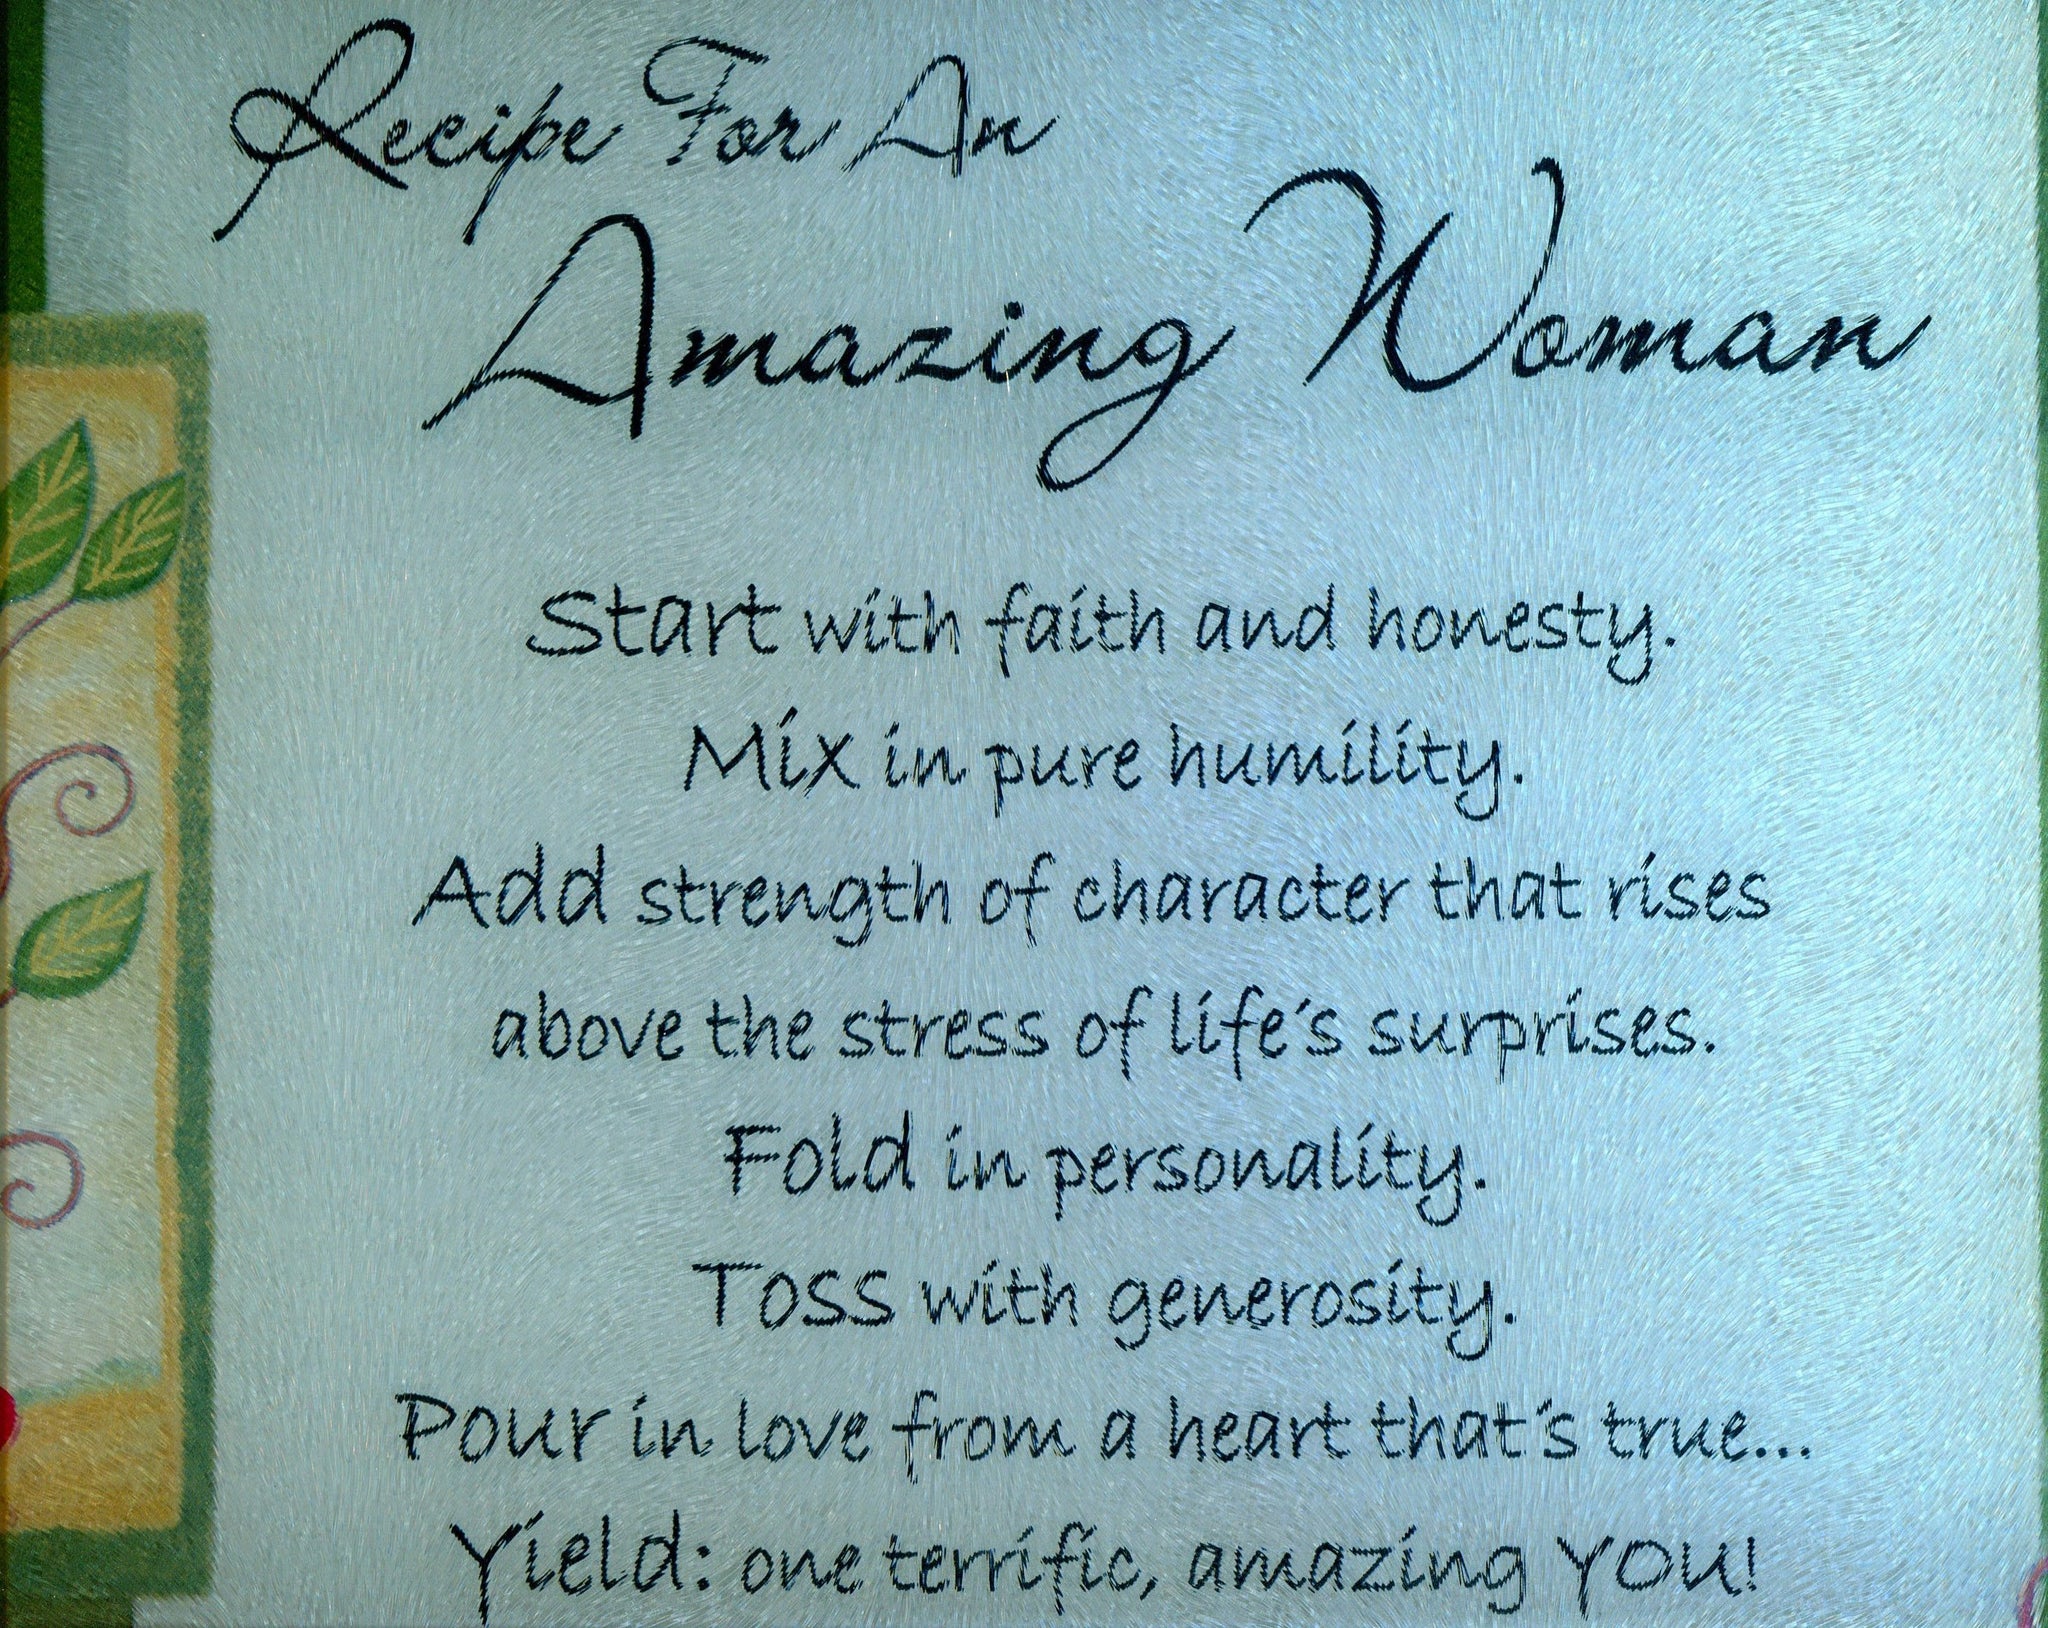 Recipe For An Amazing Woman Catholic Prints Pictures Catholic Pictures